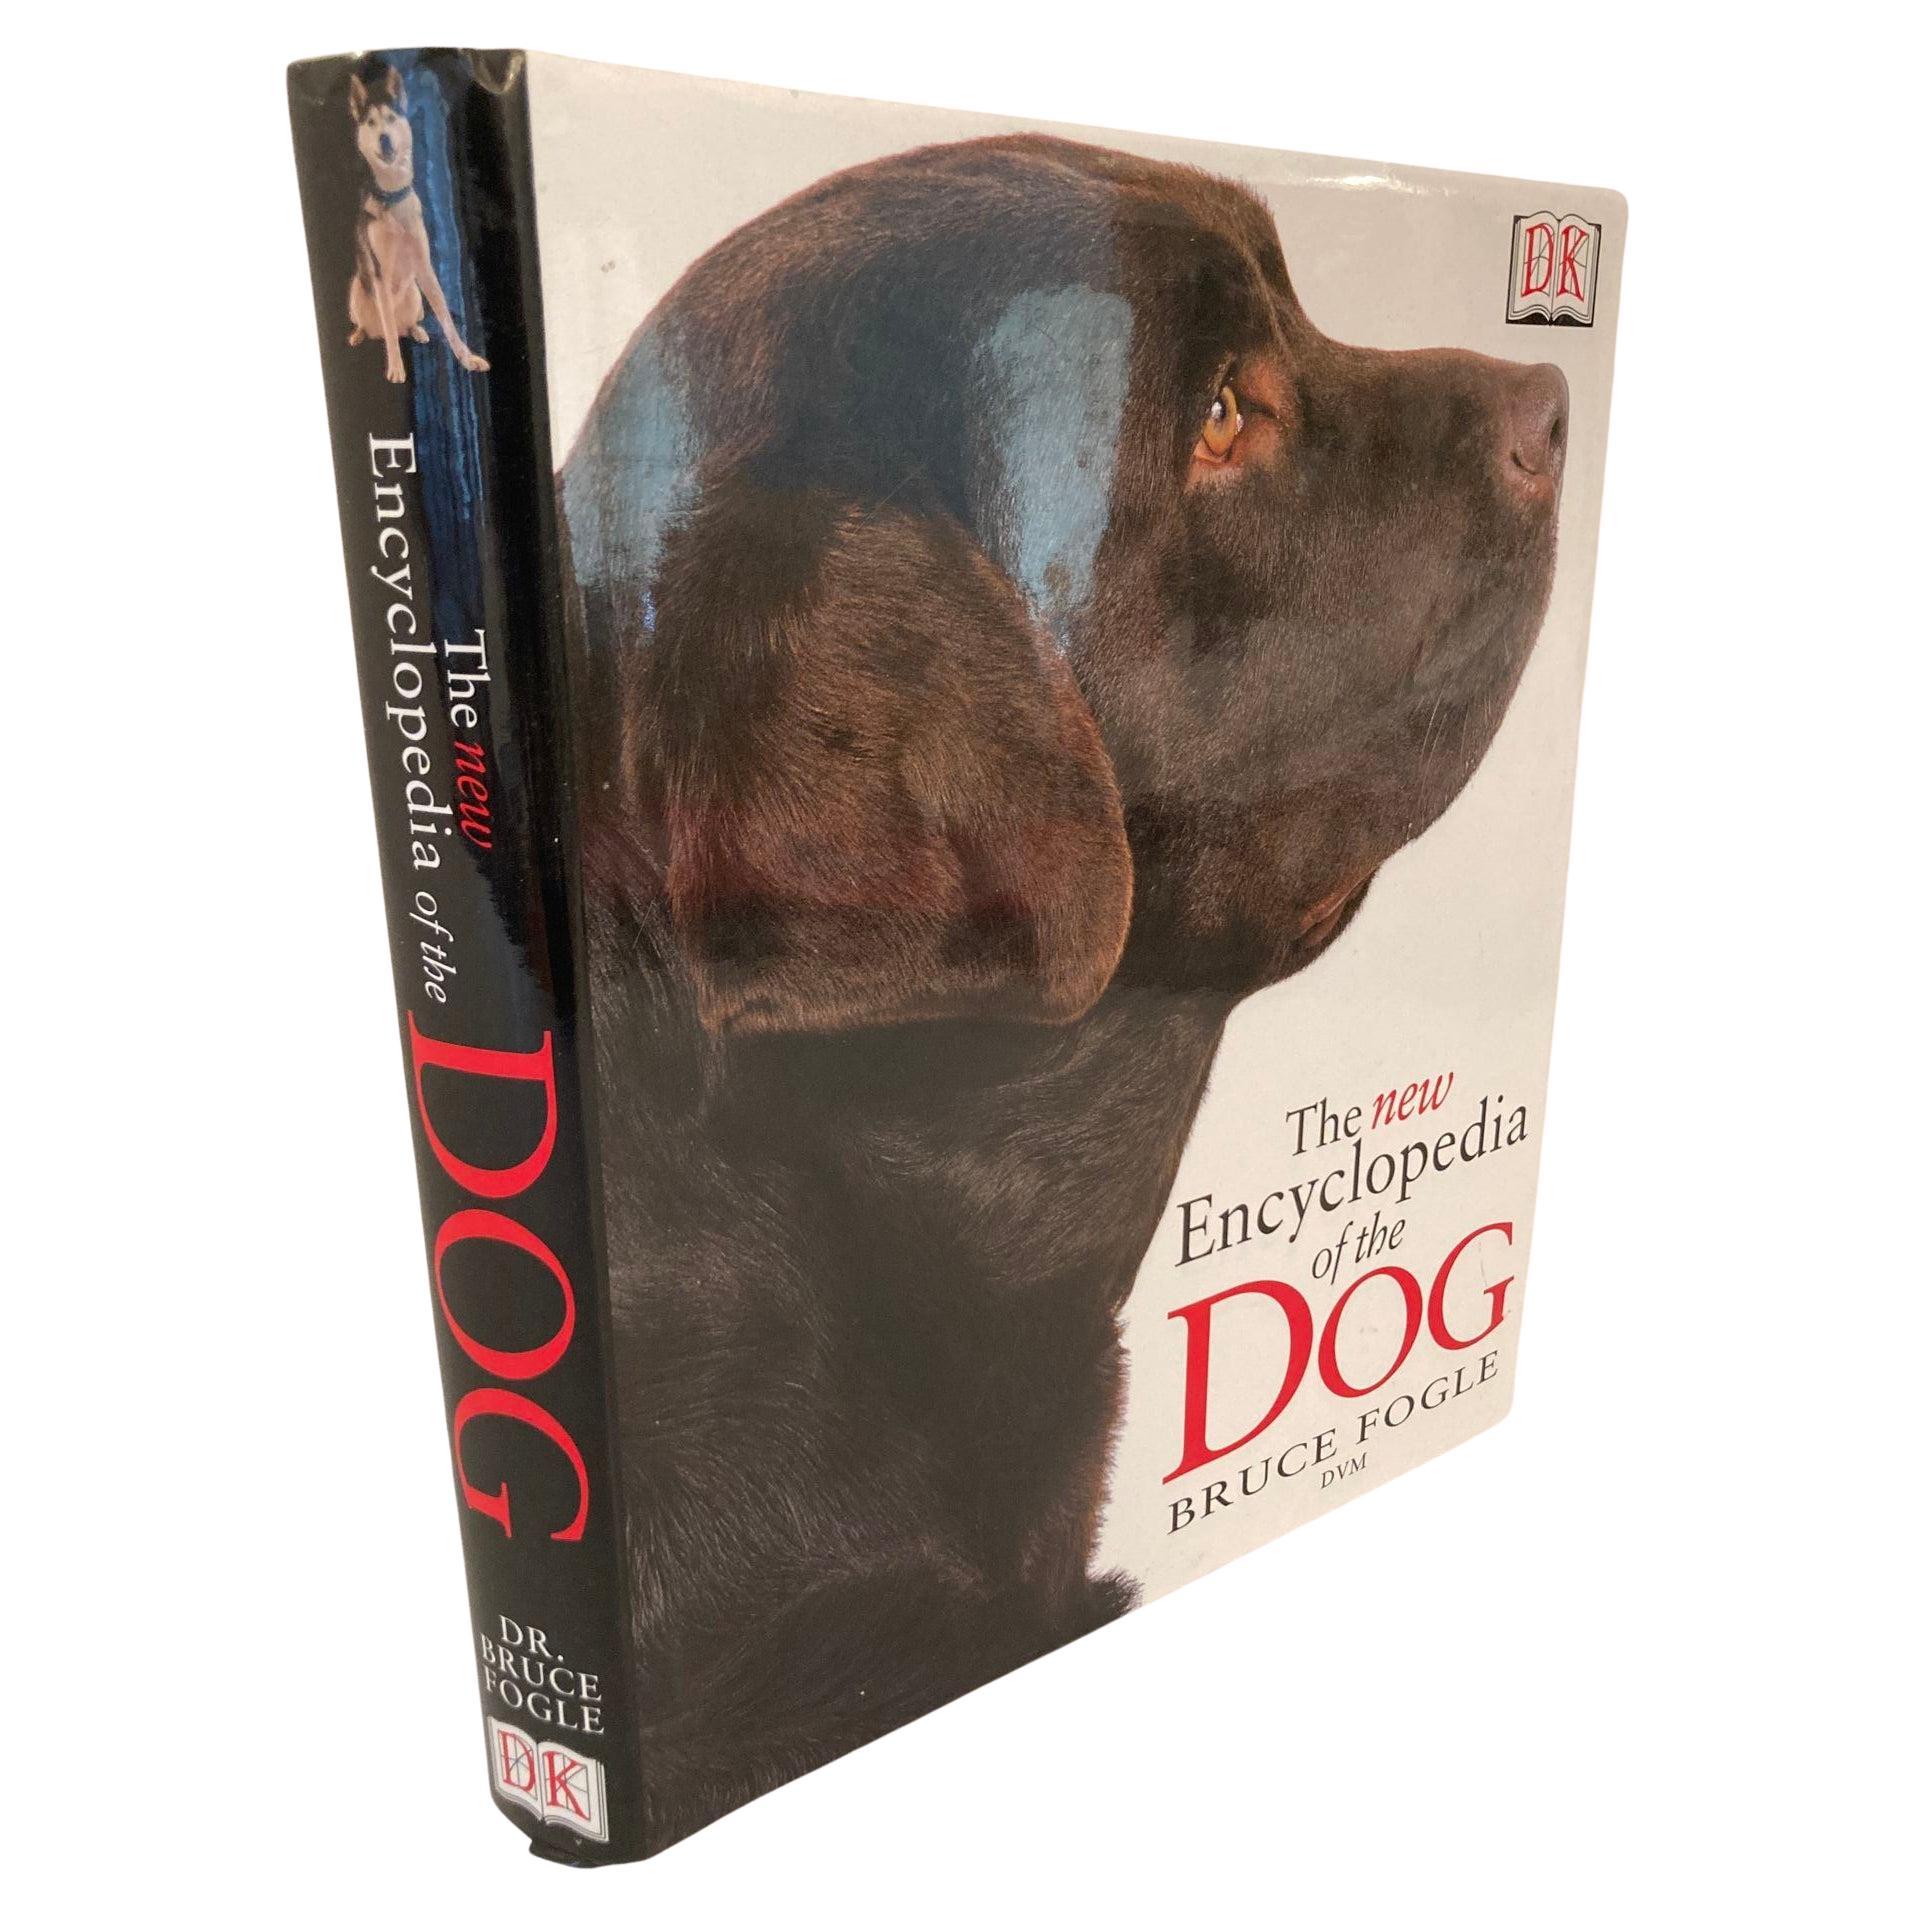 New Encyclopedia of Dog Hardcover Book by Bruce Fogle For Sale